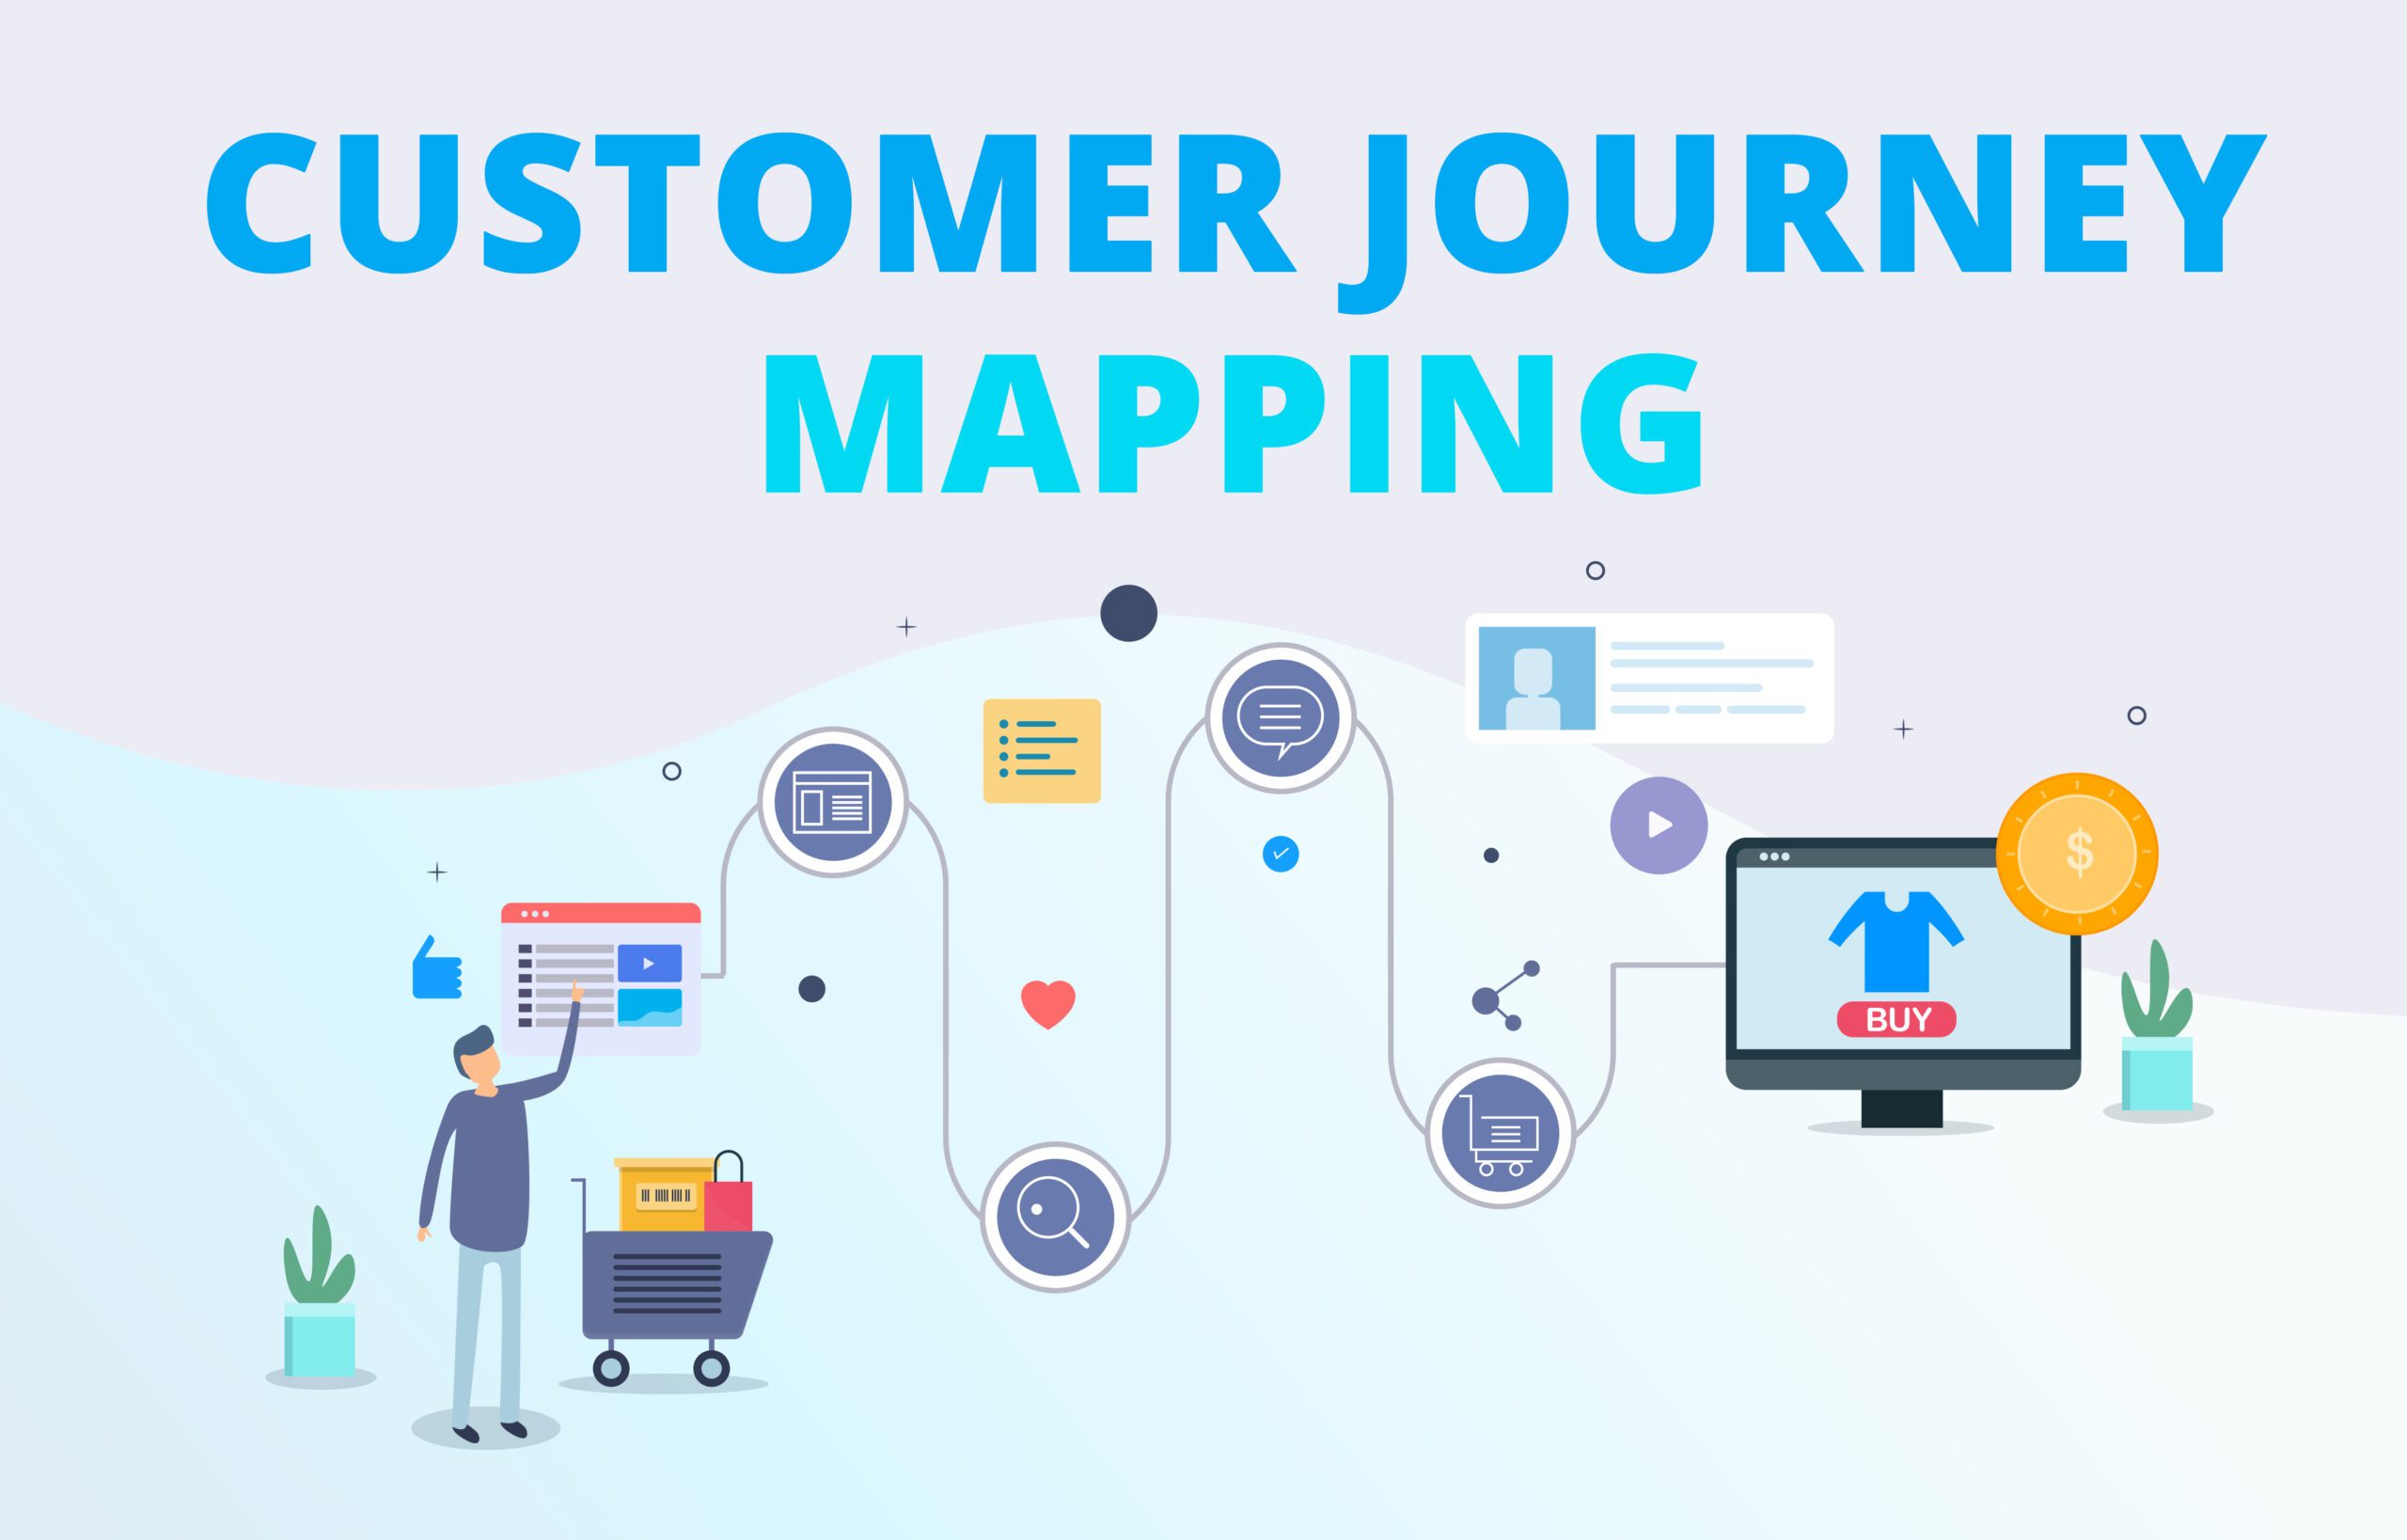 Graphic showing the steps in a customer journey